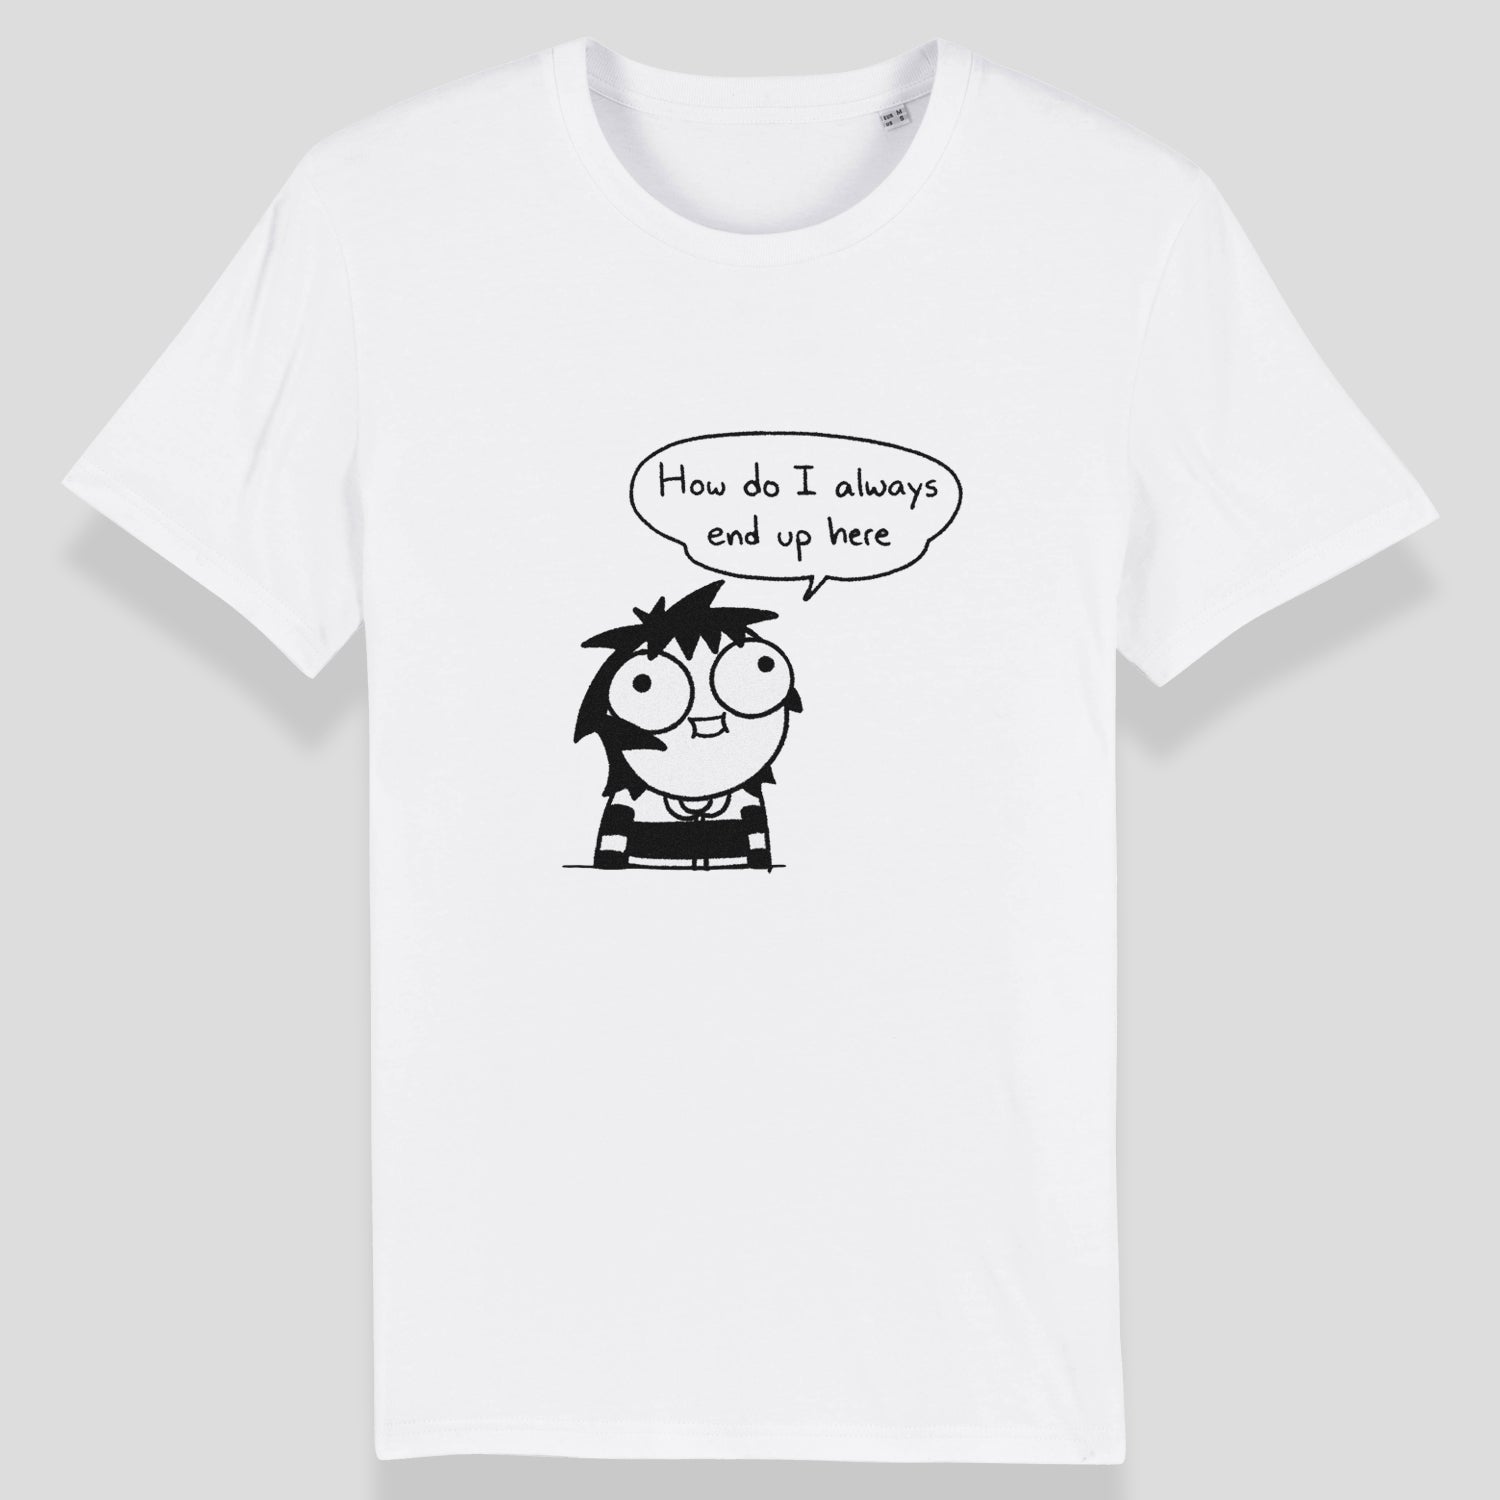 "How Do I Always End Up Here" T-Shirt